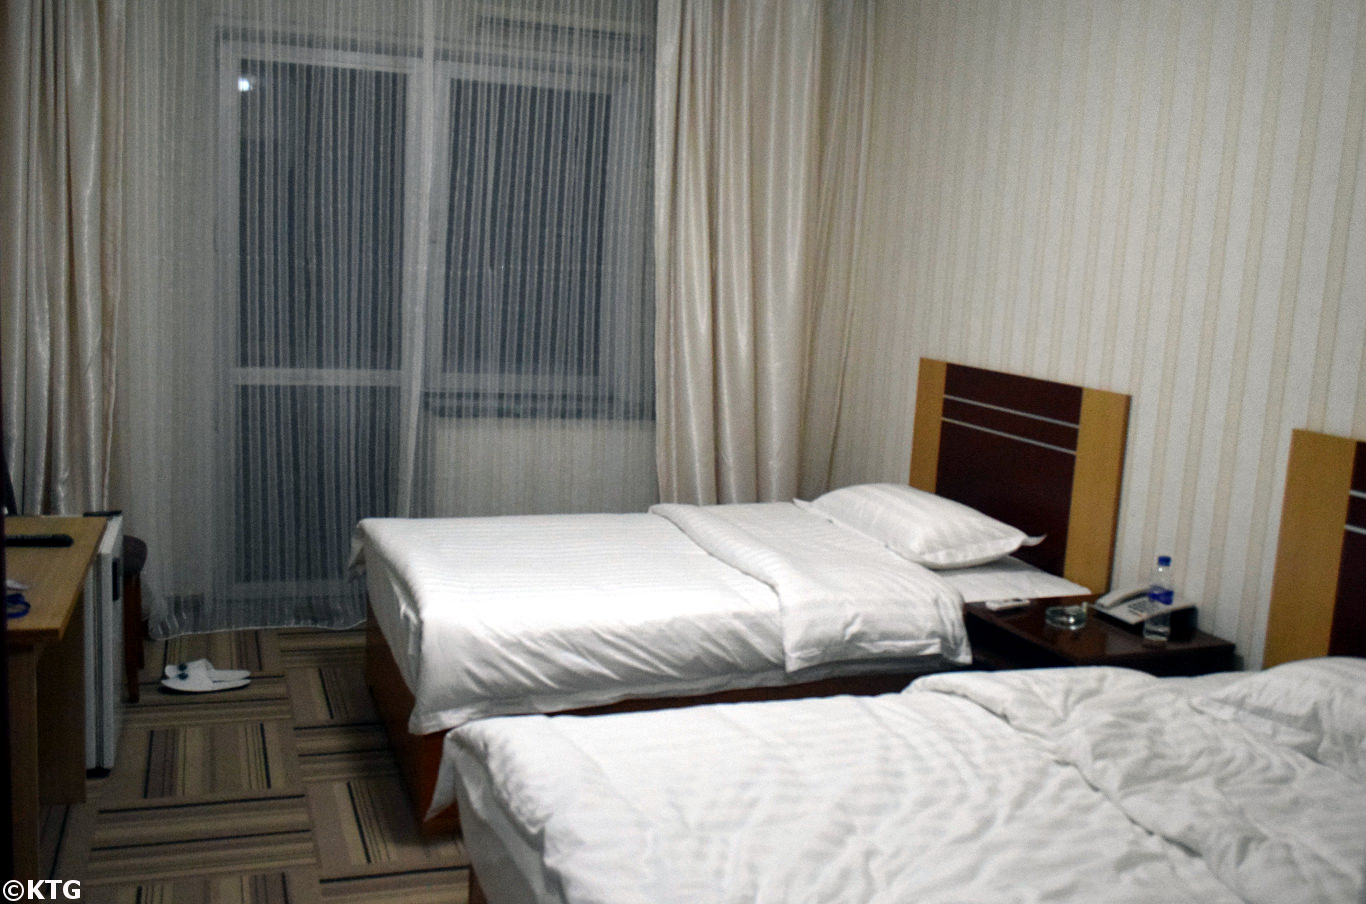 Room in the Ryanggang Hotel lobby in Pyongyang, North Korea (DPRK). This is a first class hotel in North Korea. Picture taken by KTG Tours